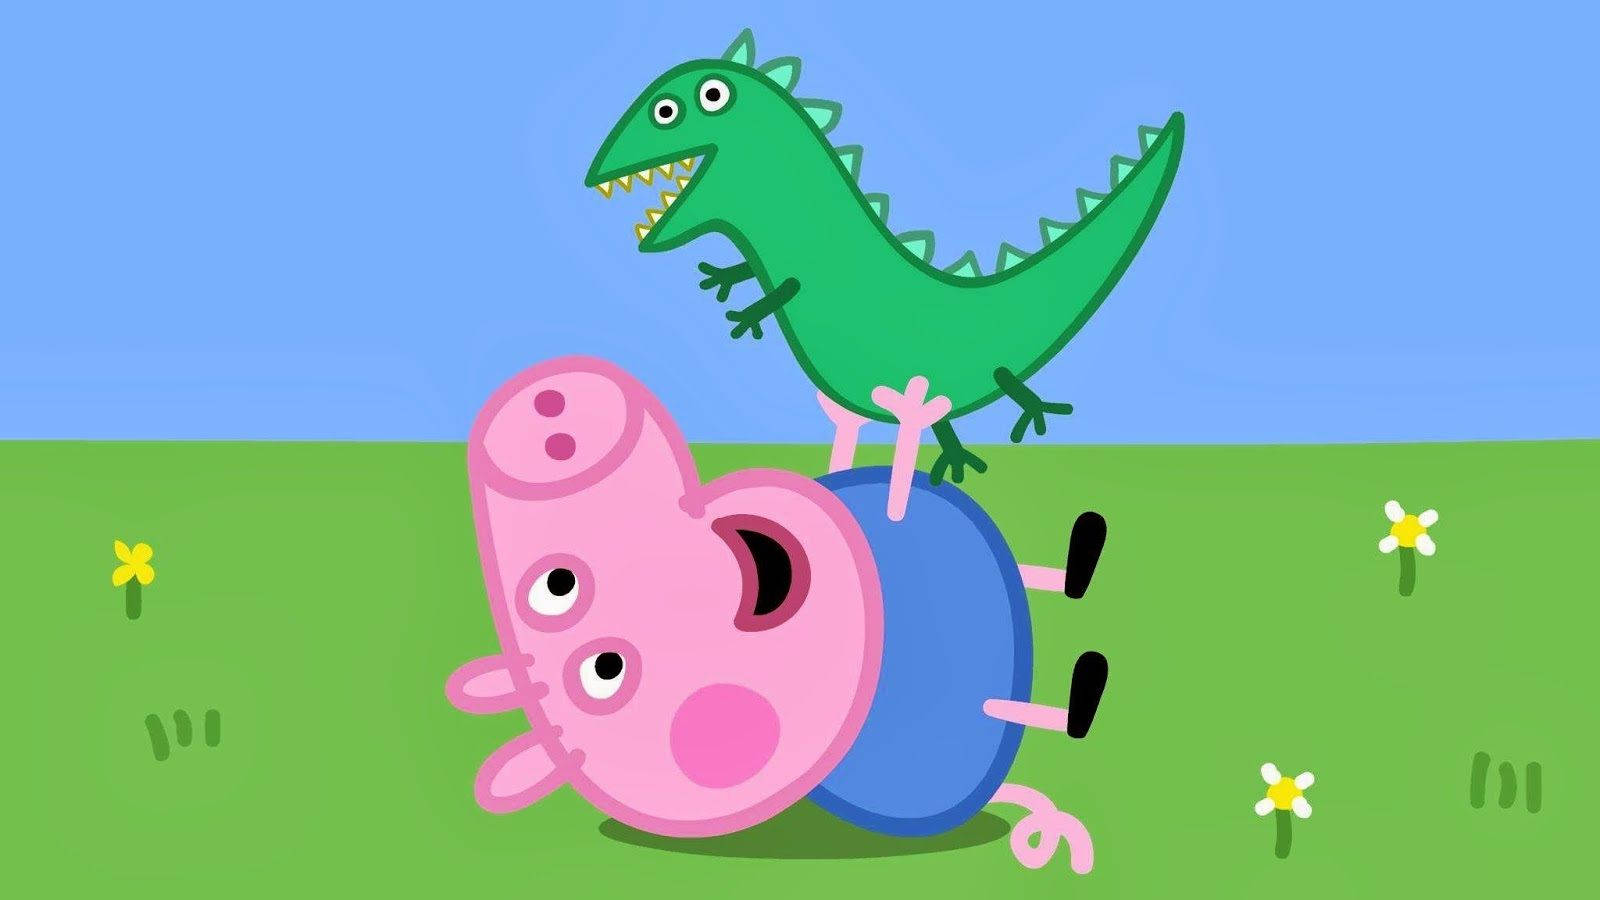 George the Dinosaur and Peppa Pig playing together Wallpaper